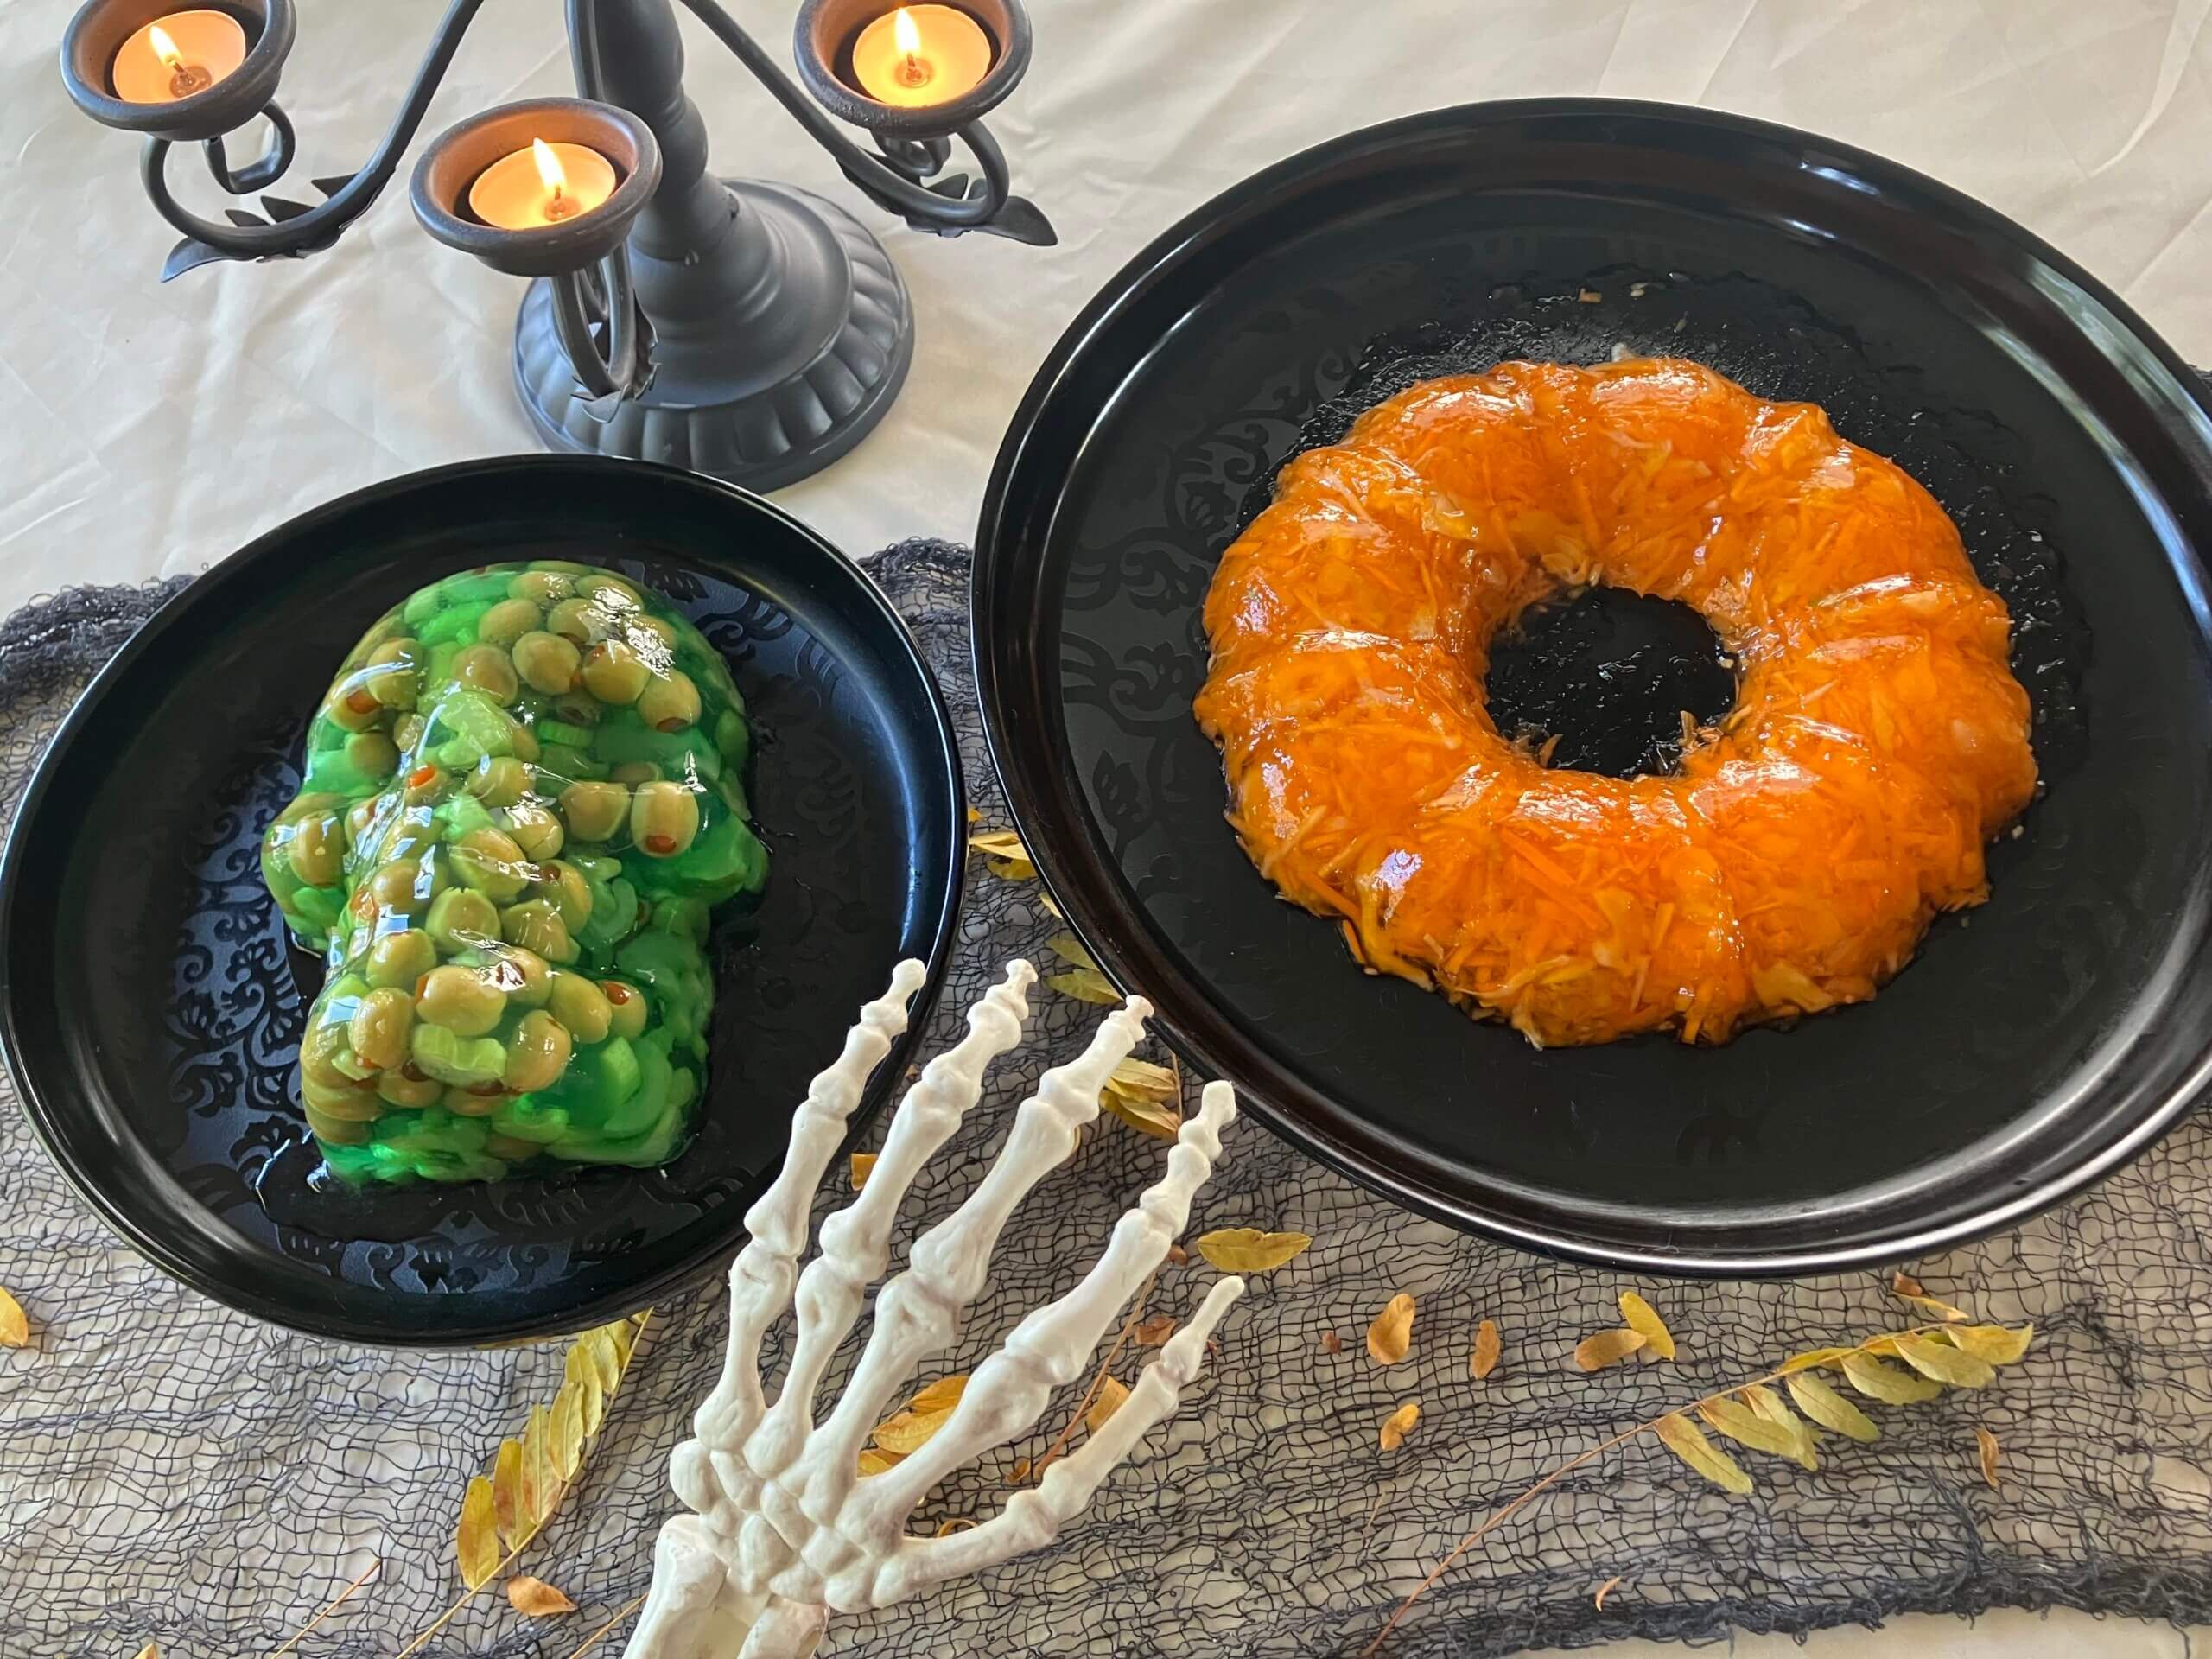 Two Jell-O molds sit side by side on black plates. The one on the left is green, shaped like a skull, and contains green olives. The one on the right is orange, shaped like a ring, and contains flecks of grated carrot and cabbage. In the background is a grey candelabra with orange tea lights. In the foreground is a skeleton hand and a sprig of fall foliage.